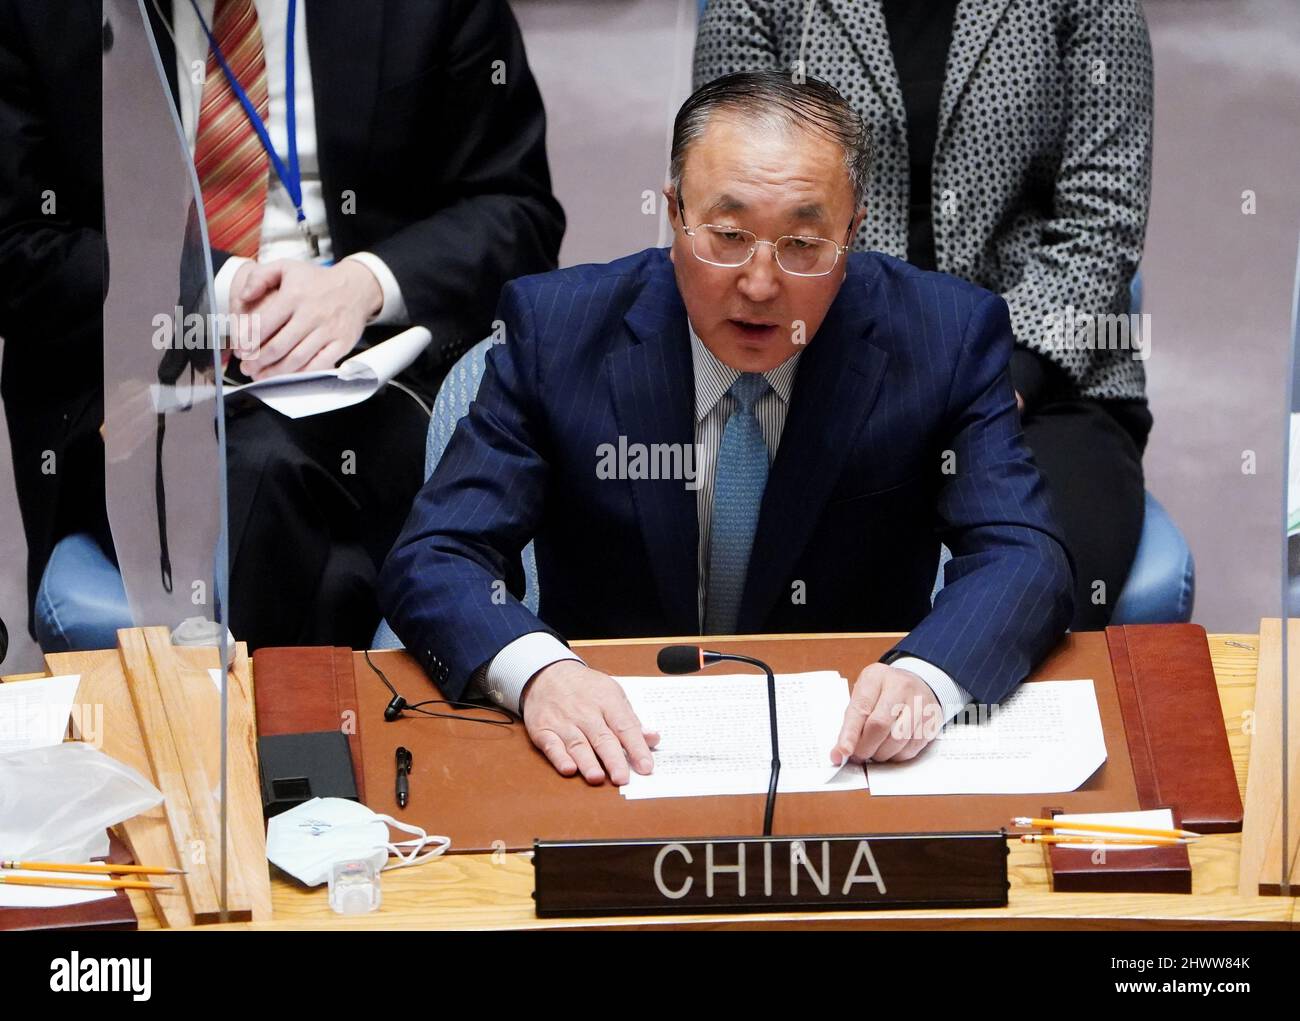 China's Ambassador to the UN Zhang Jun speaks during a meeting of the United Nations Security Council on Threats to International Peace and Security, following Russia's invasion of Ukraine, in New York City, U.S., March 7, 2022. REUTERS/Carlo Allegri Stock Photo